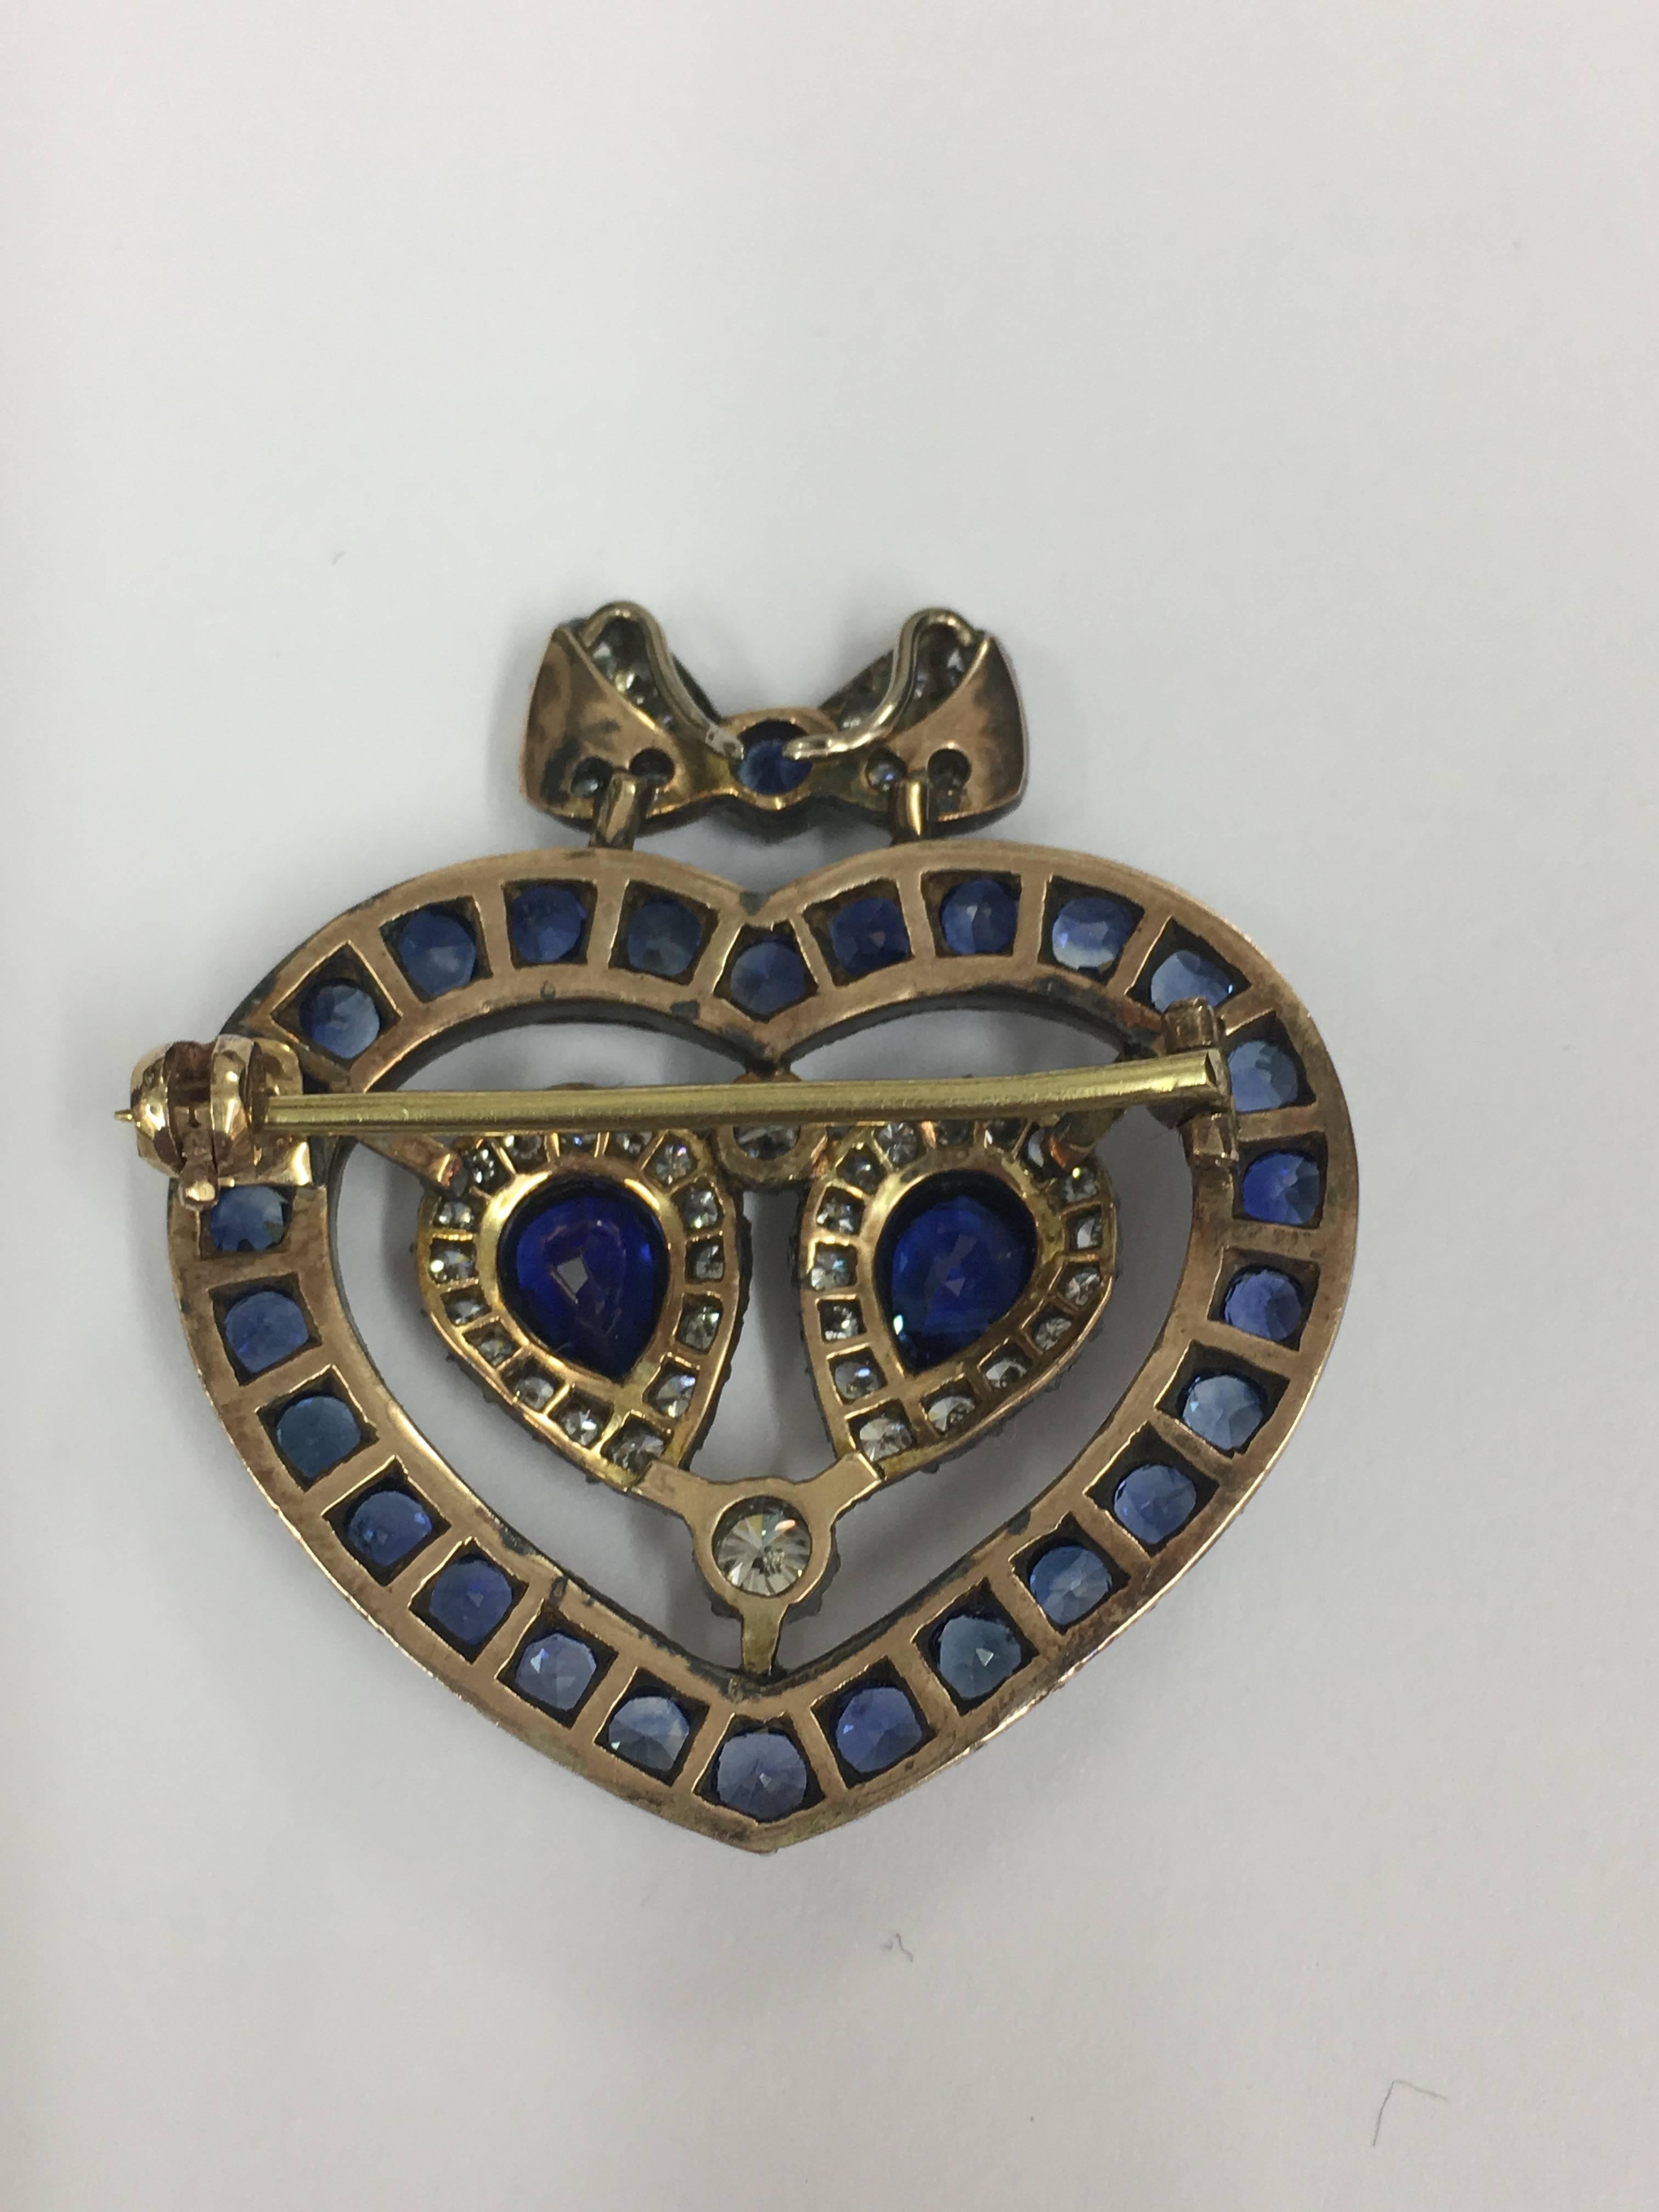 Love heart brooch made of white diamonds and  high quality sapphires with bow detail. Canbe worn as a brooch or pendant set in 18ct Yellow gold and silver, very fine work beautifully set. The style of the brooch is very Victorian but we feel that